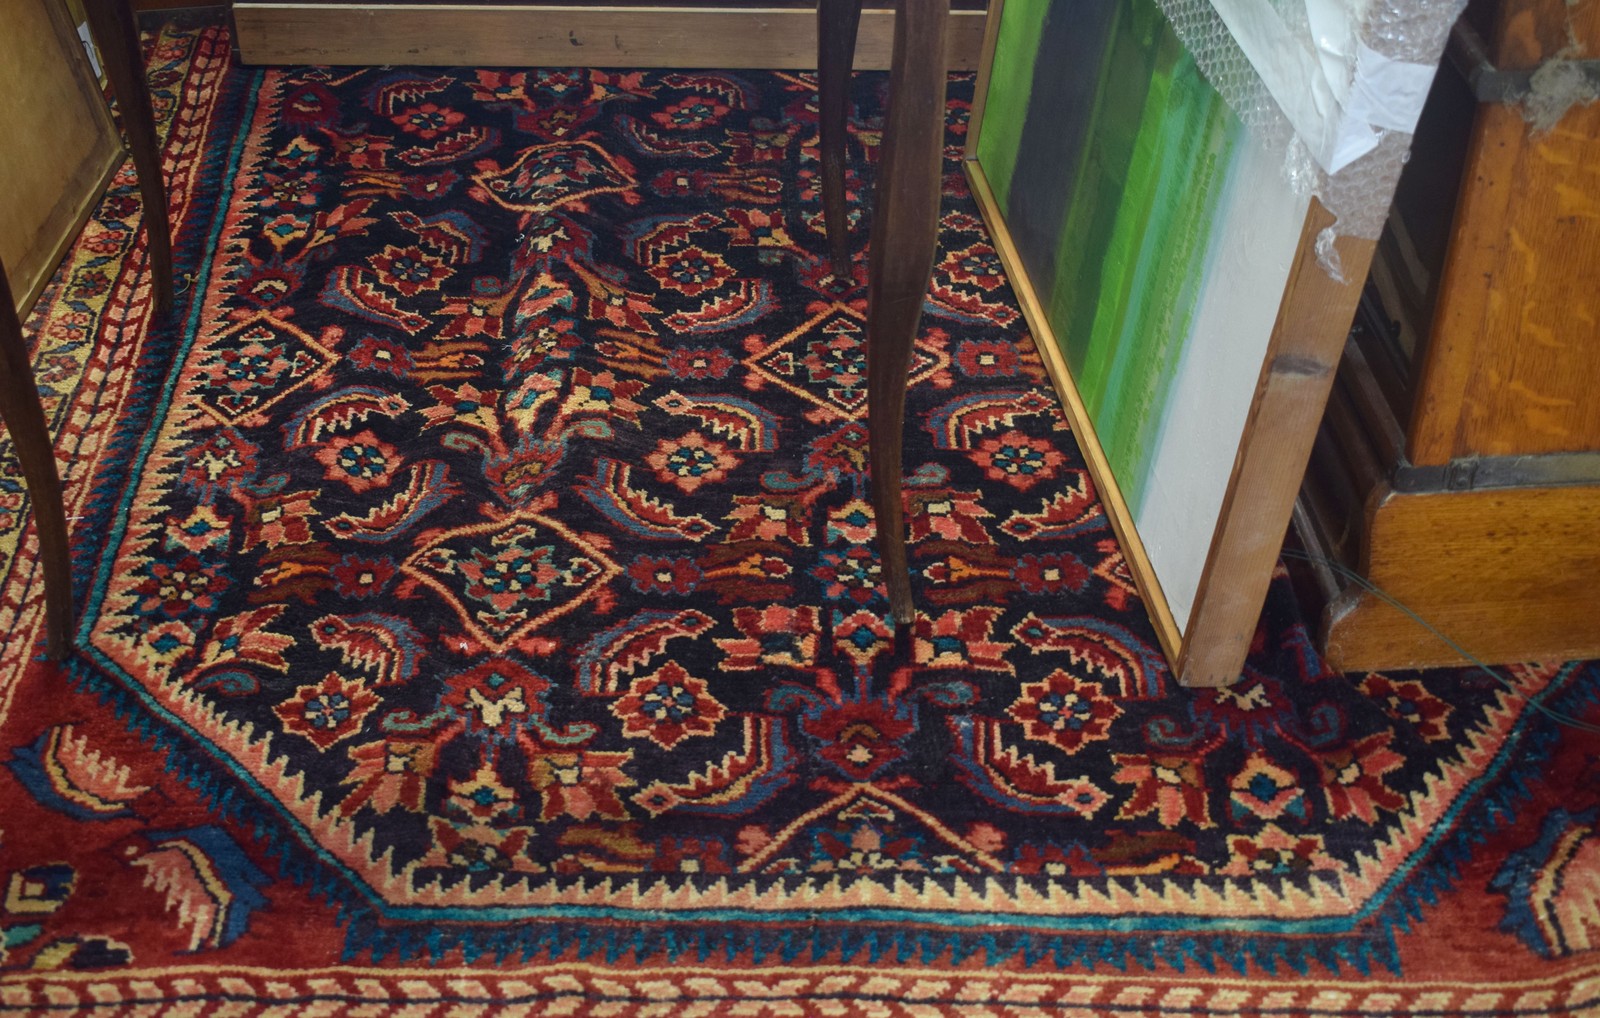 Modern Caucasian carpet^ central panel of geometric floral designs and stylised animals etc^ - Image 3 of 3